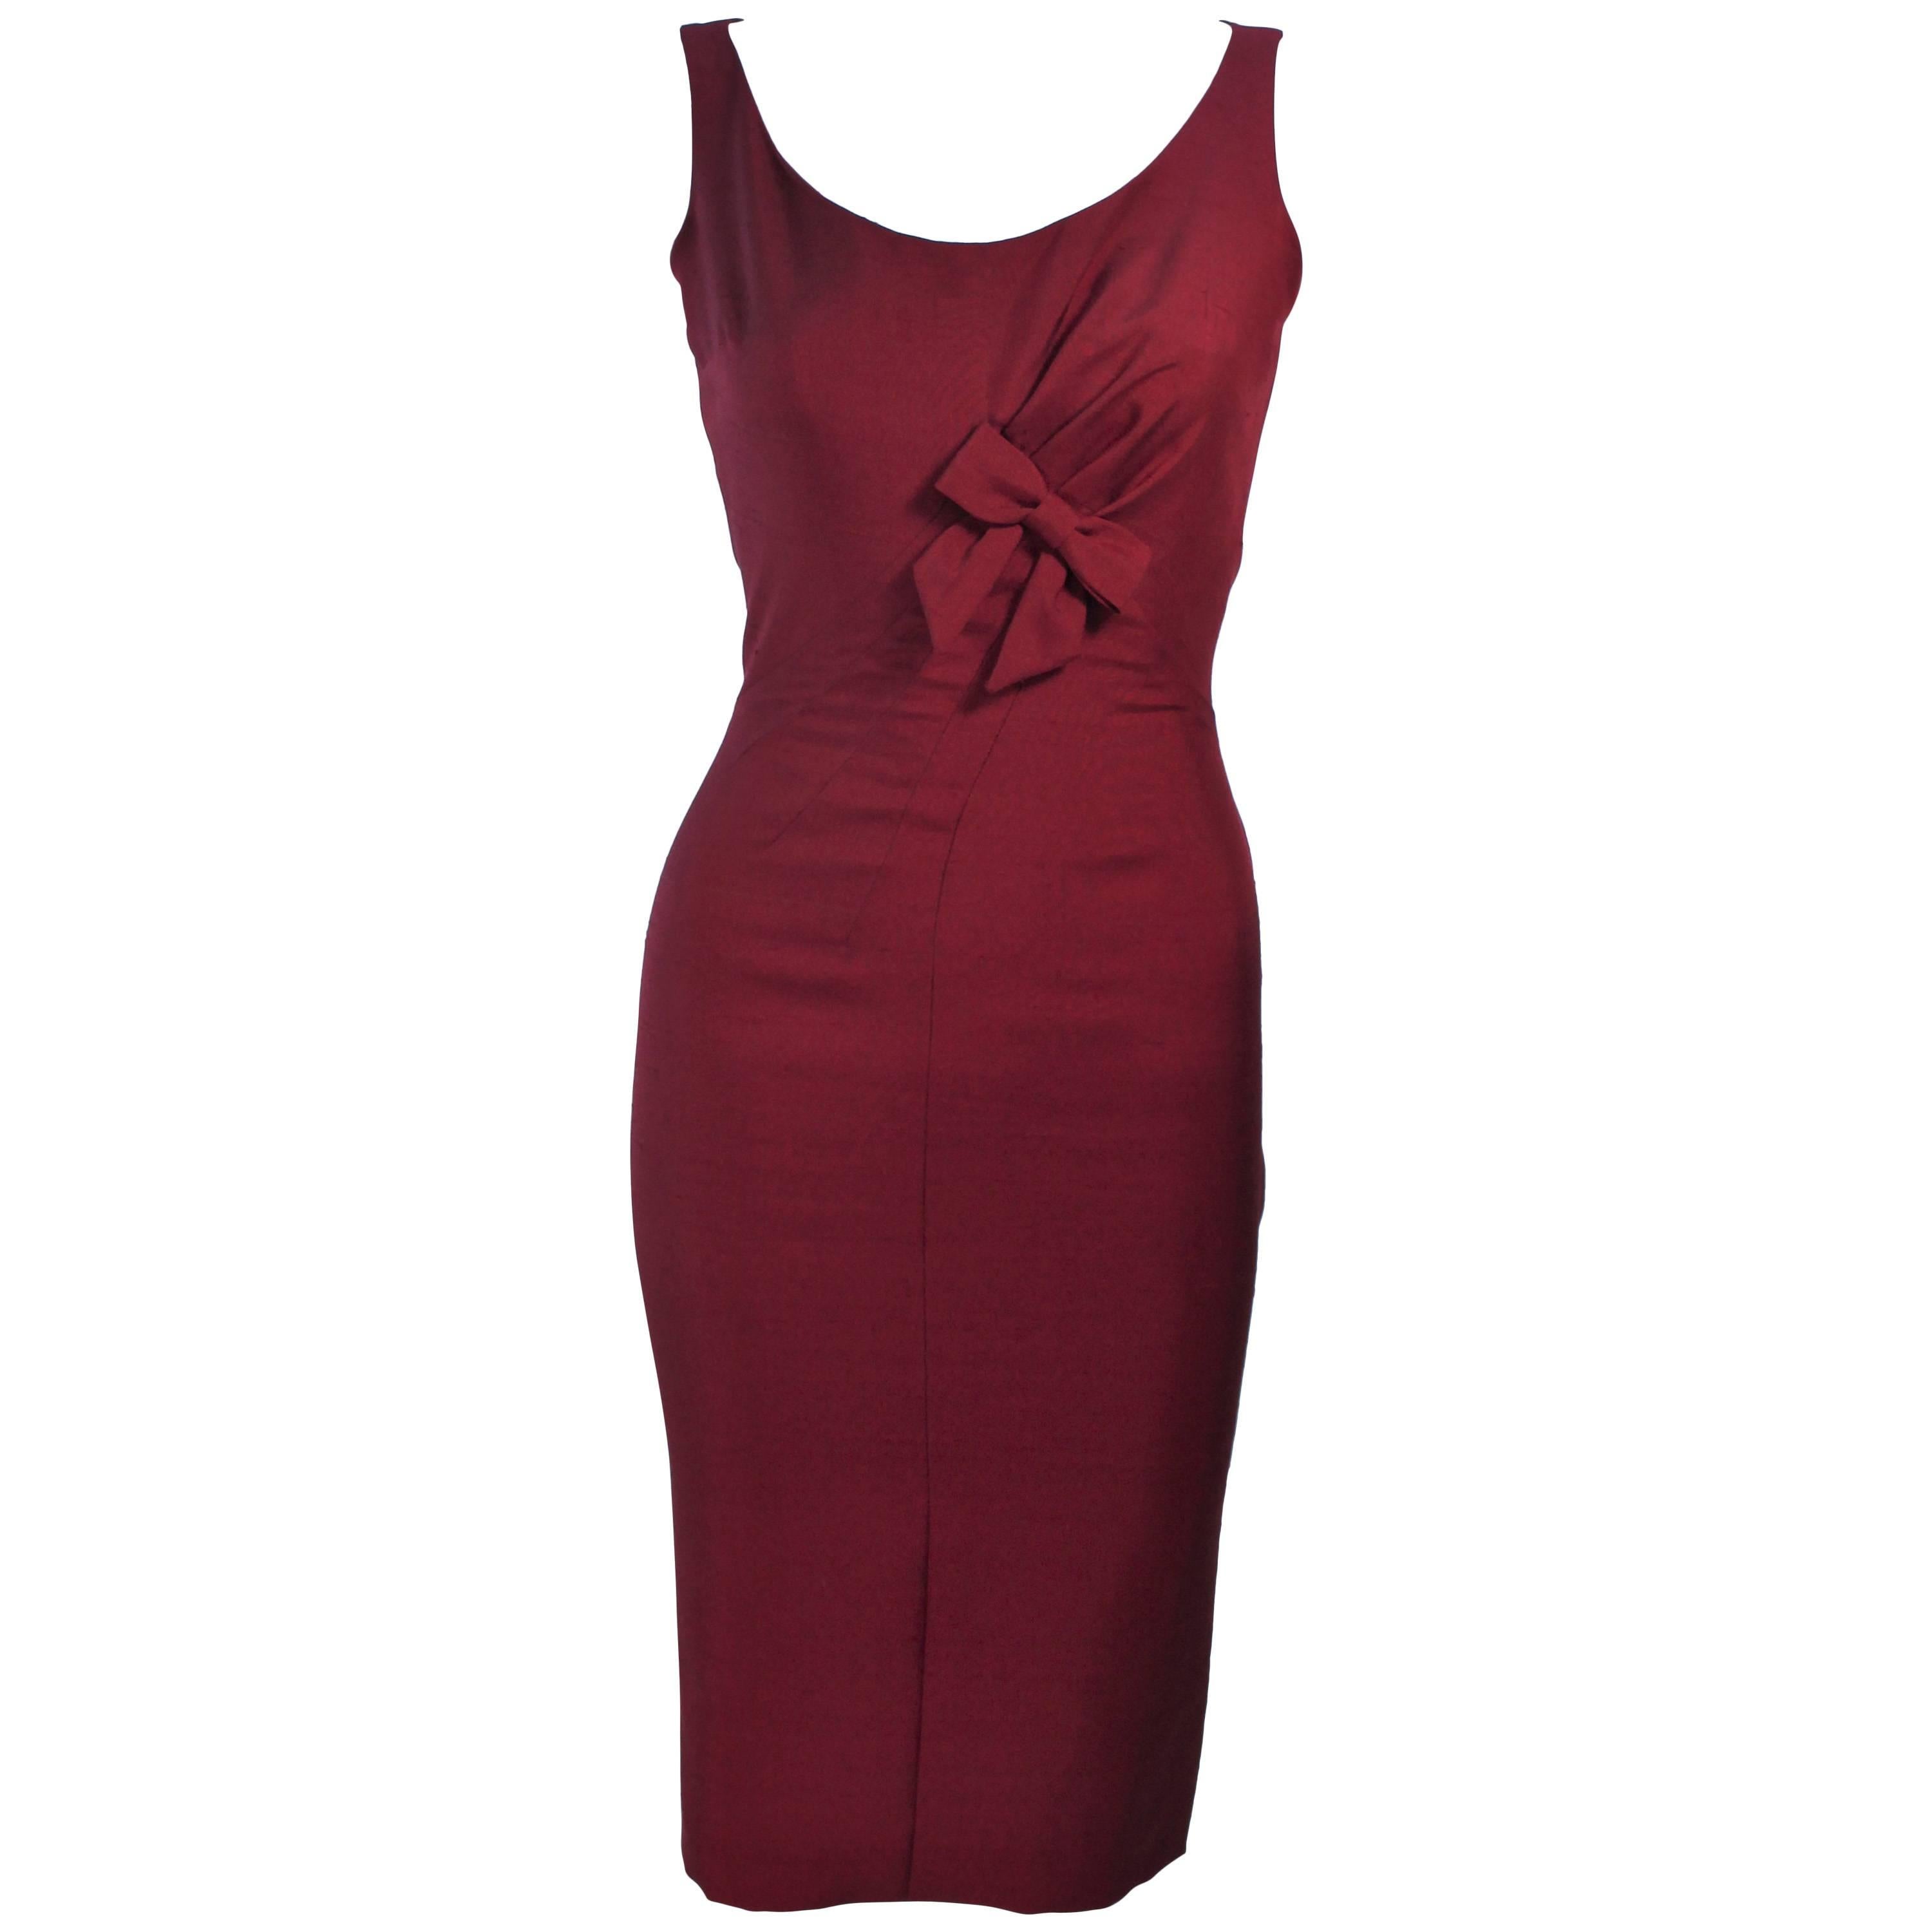 ELIZABETH MASON COUTURE Burgundy Silk Cocktail Dress with Bow Made to ...